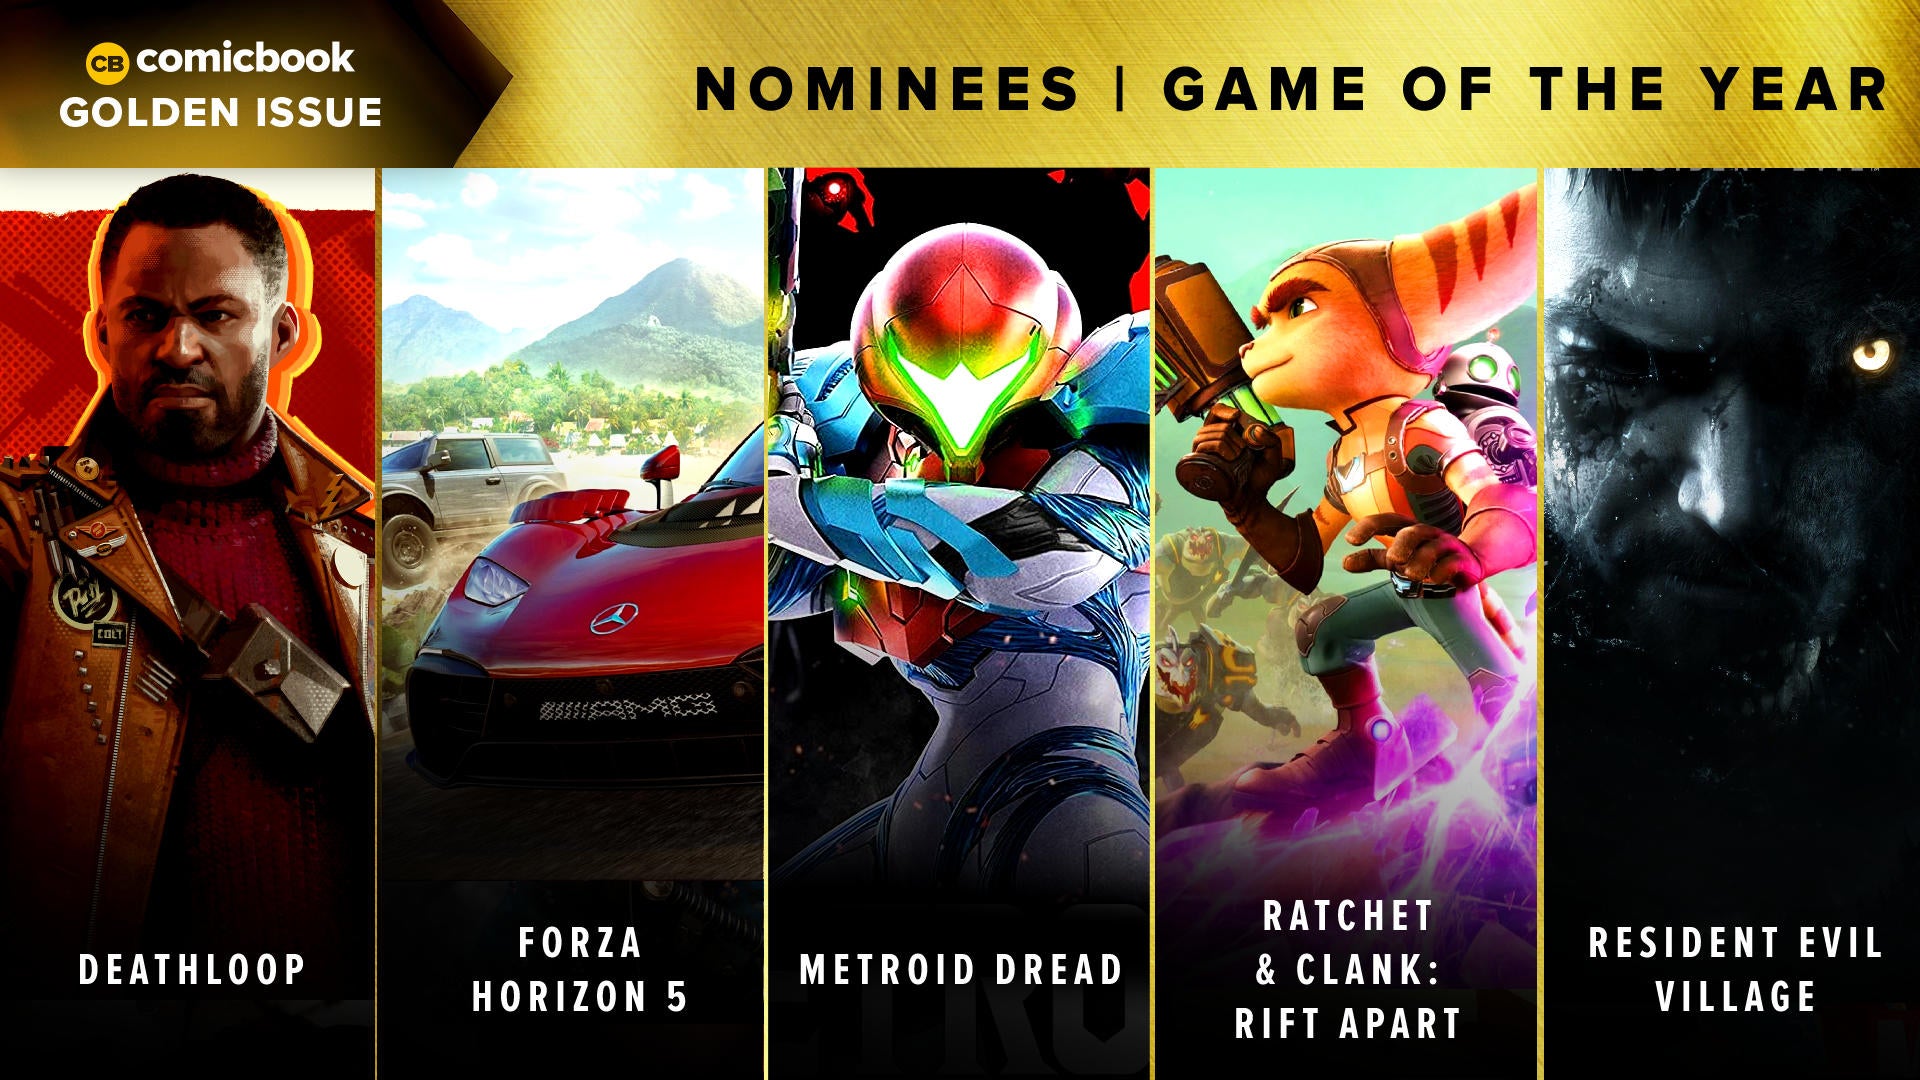 golden-issues-2021-nominees-game-of-the-year.jpg